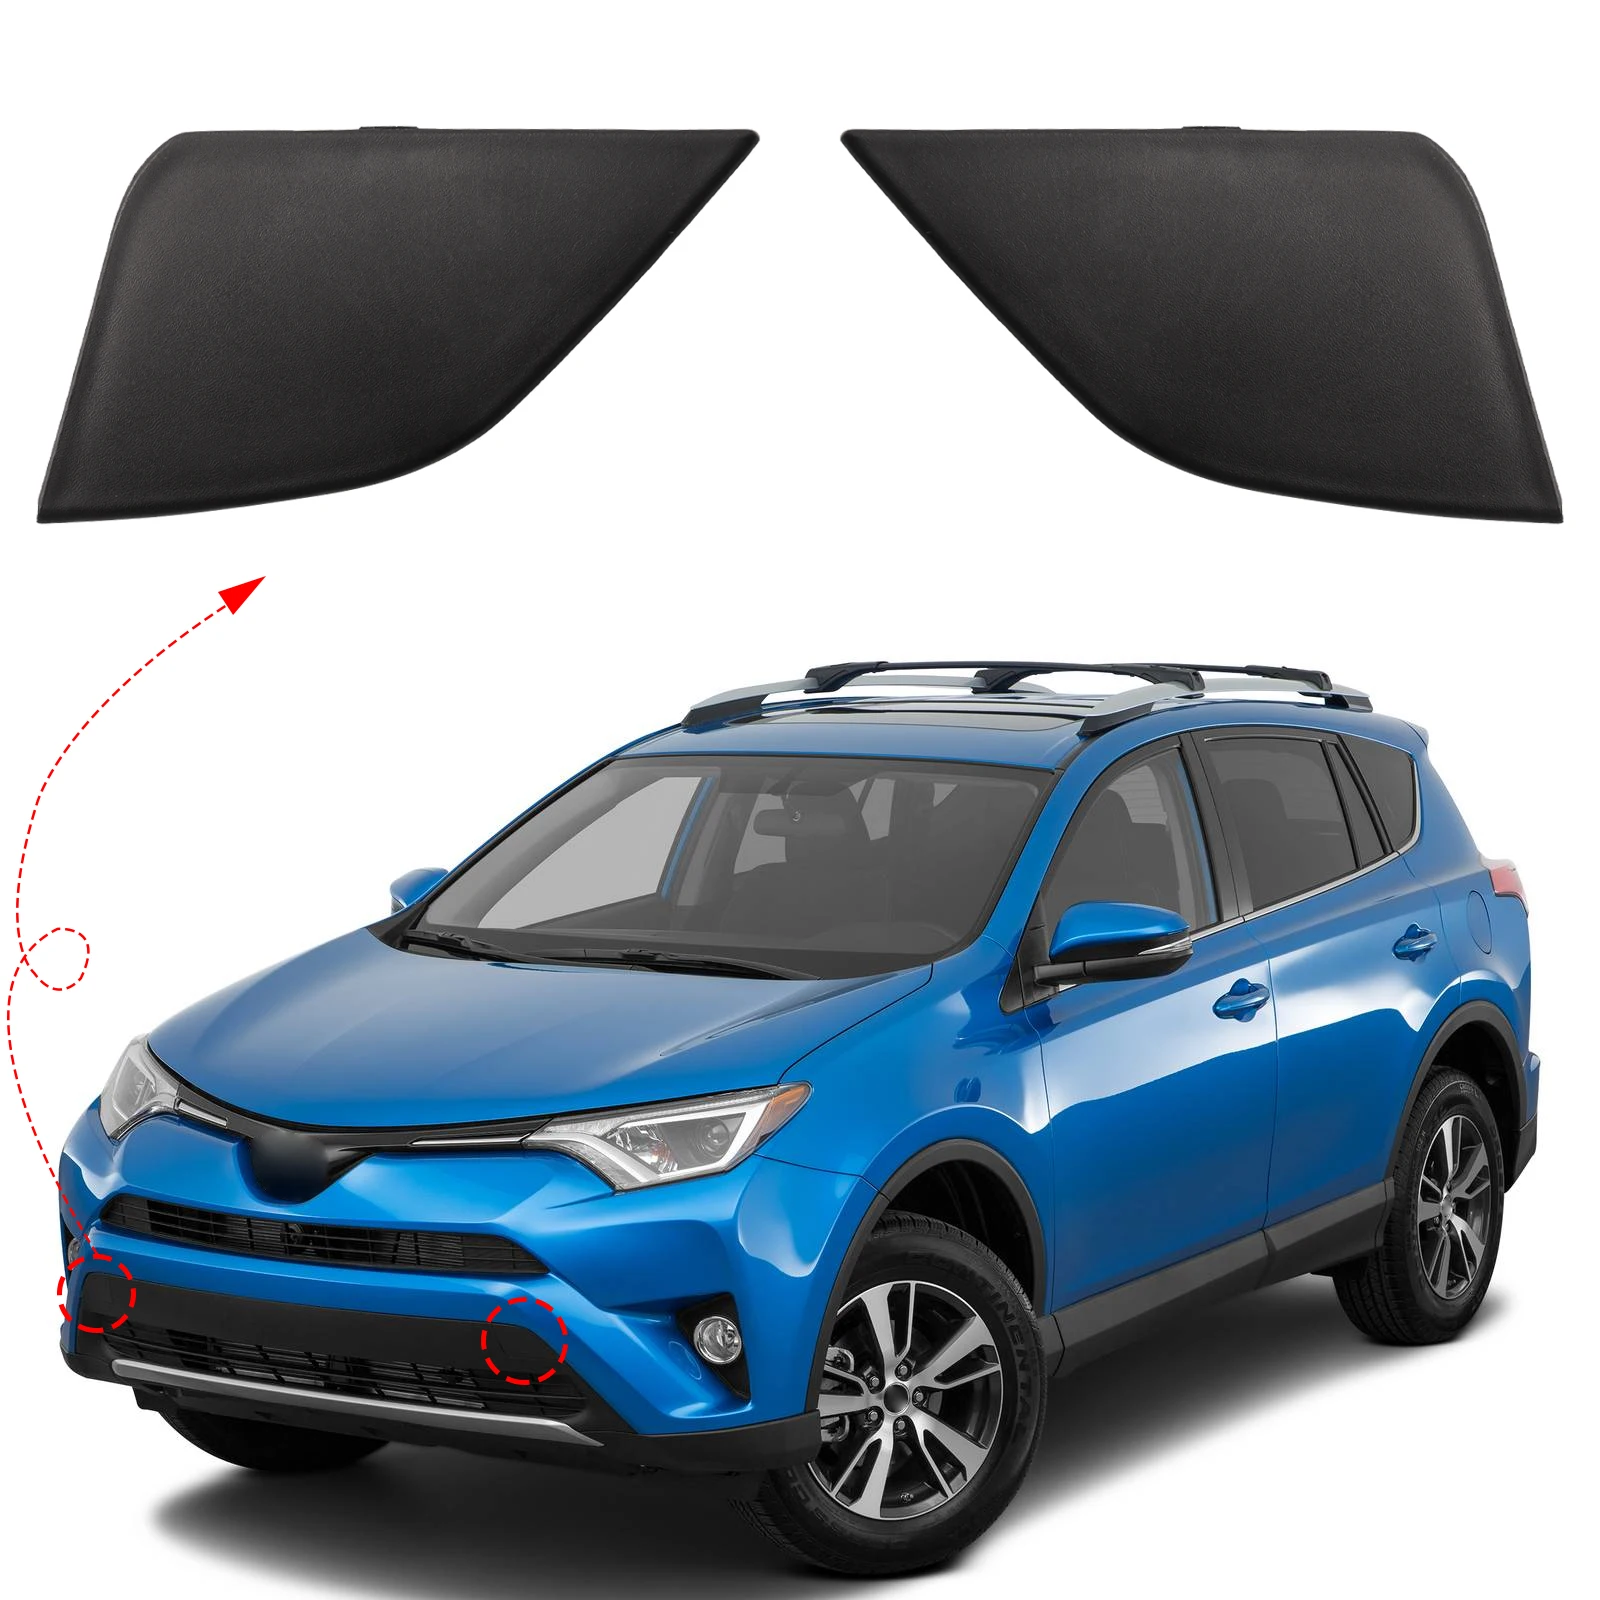 

Front Bumper Tow Hook Cover Cap Towing Eye For Toyota RAV4 Accessories 2016 2017 2018 532860R080 532850R080